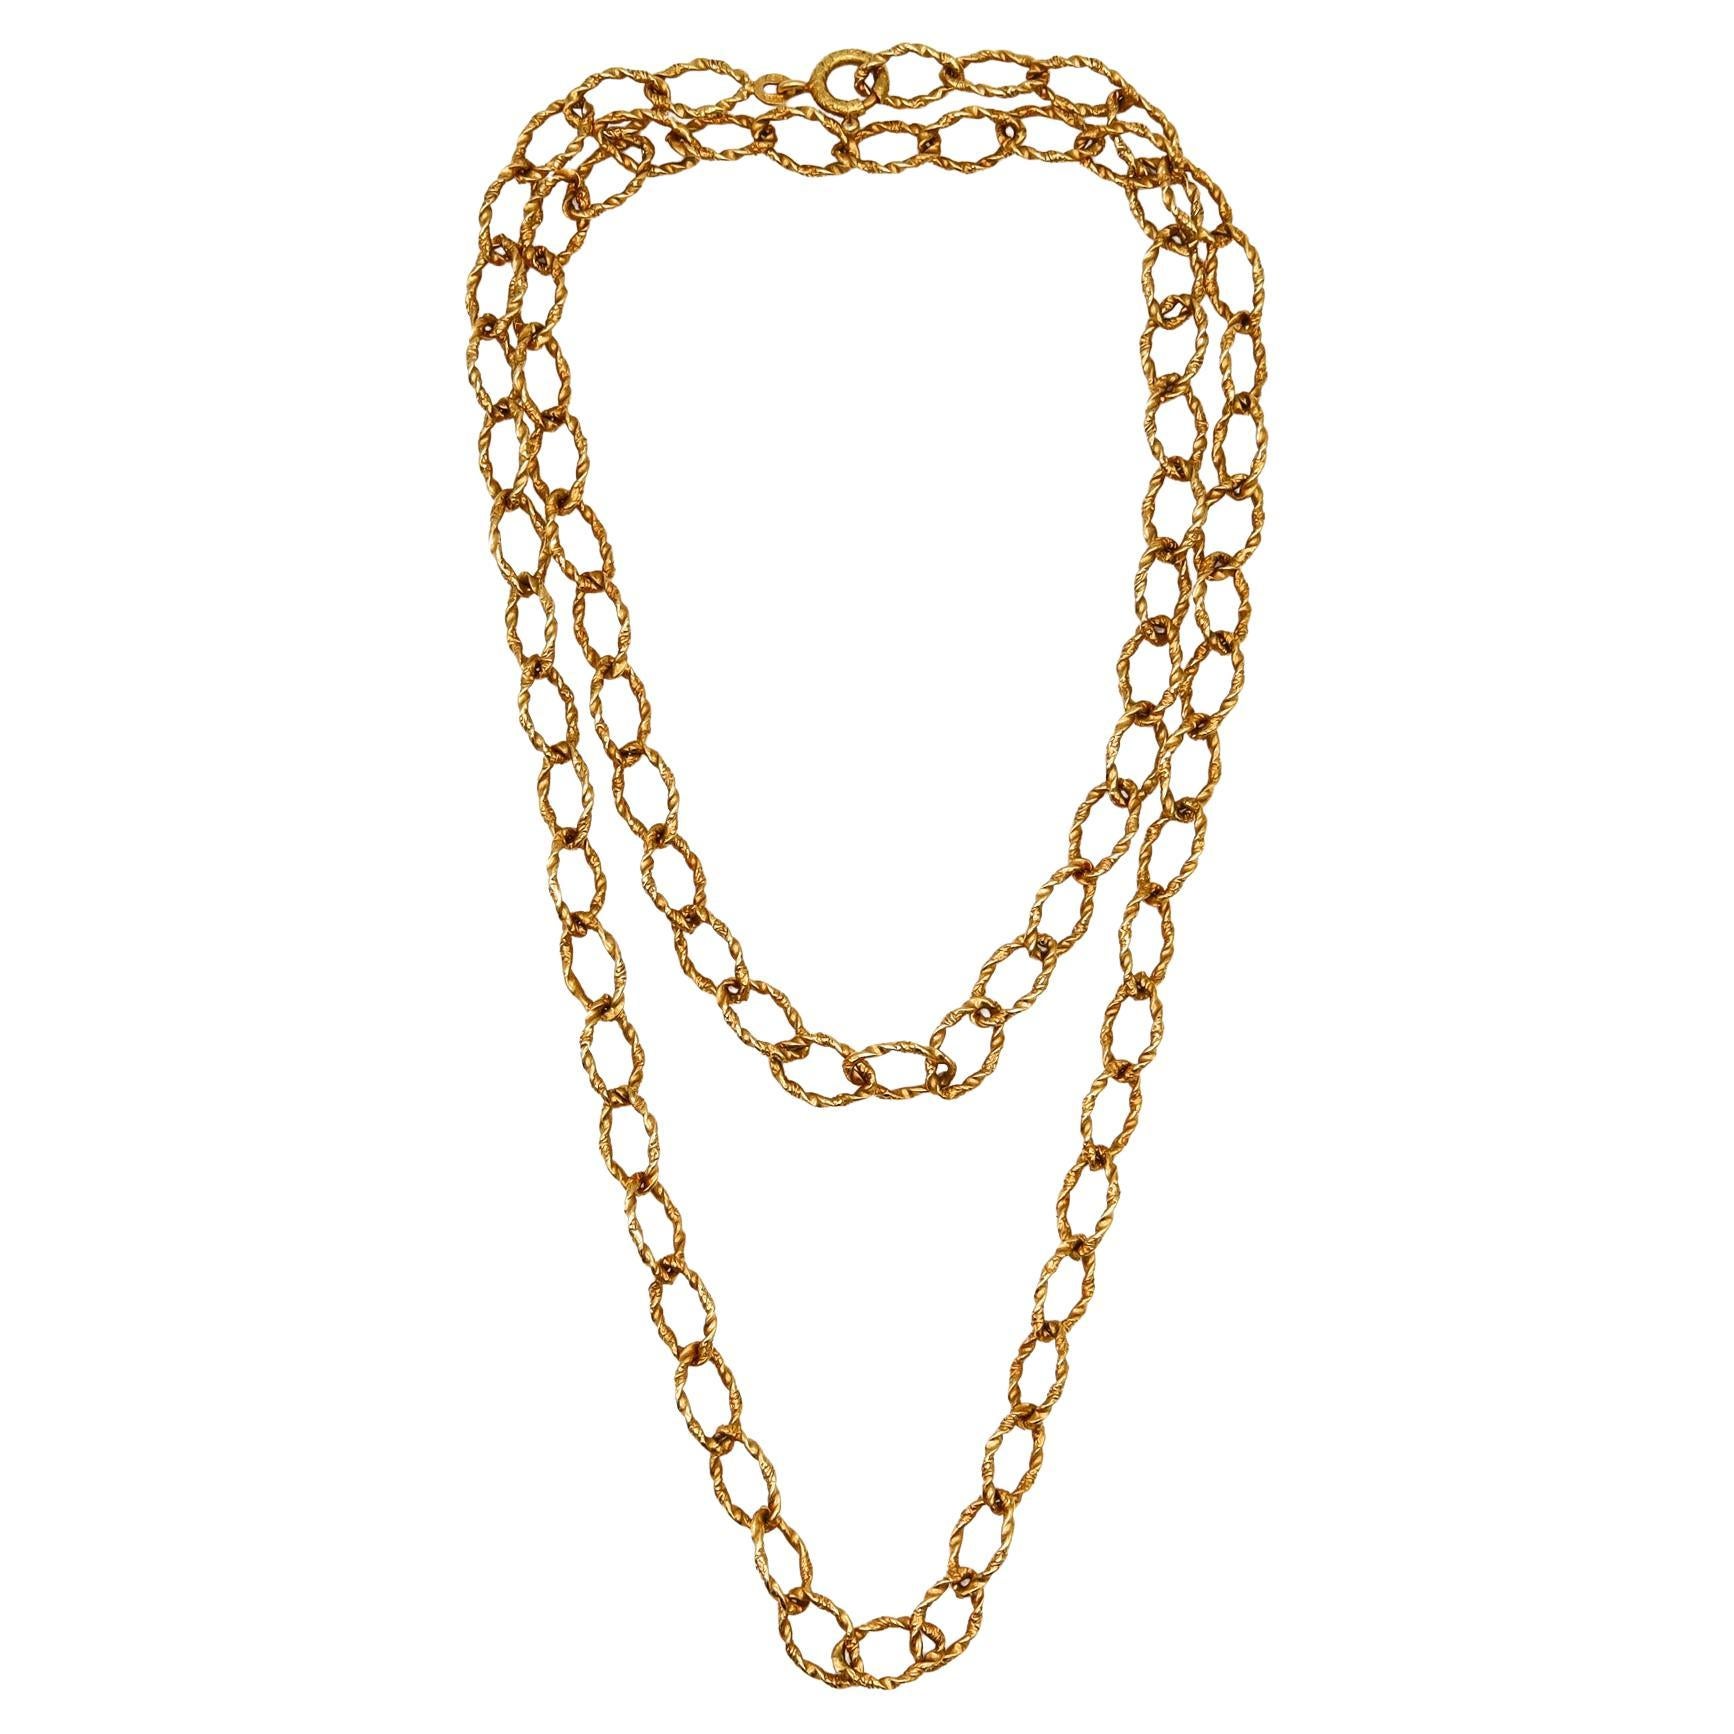 Italian Retro 1970 Modernist Long Chain with Textured Links in 18Kt Yellow Gold